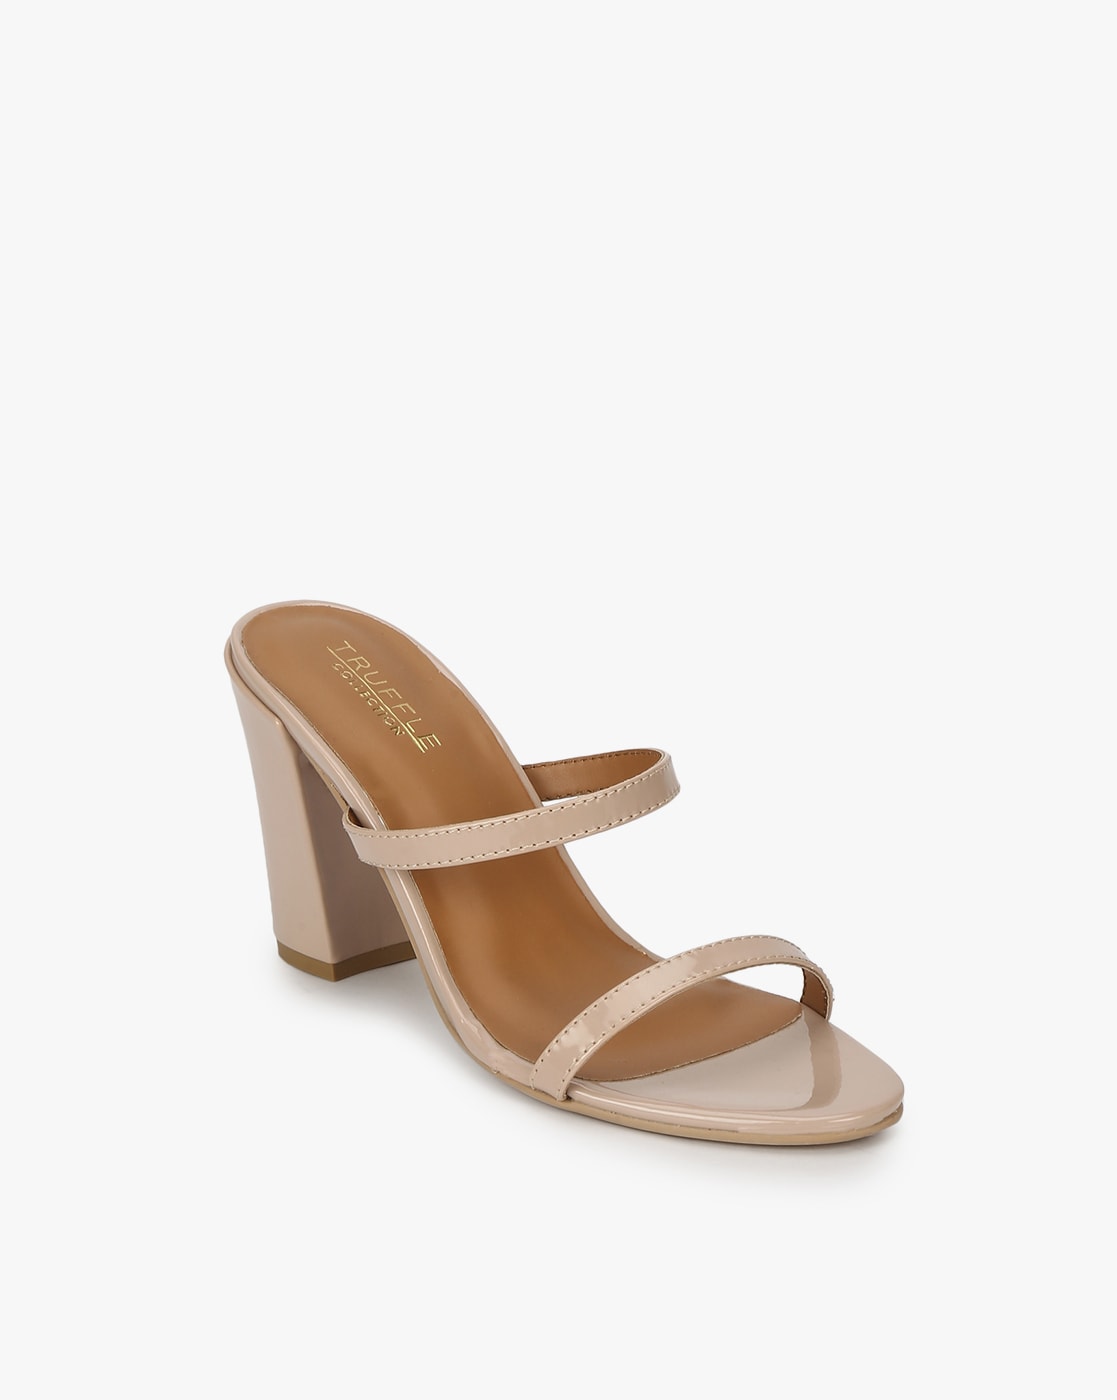 Truffle Collection square toe block heel sandals in tan | ASOS